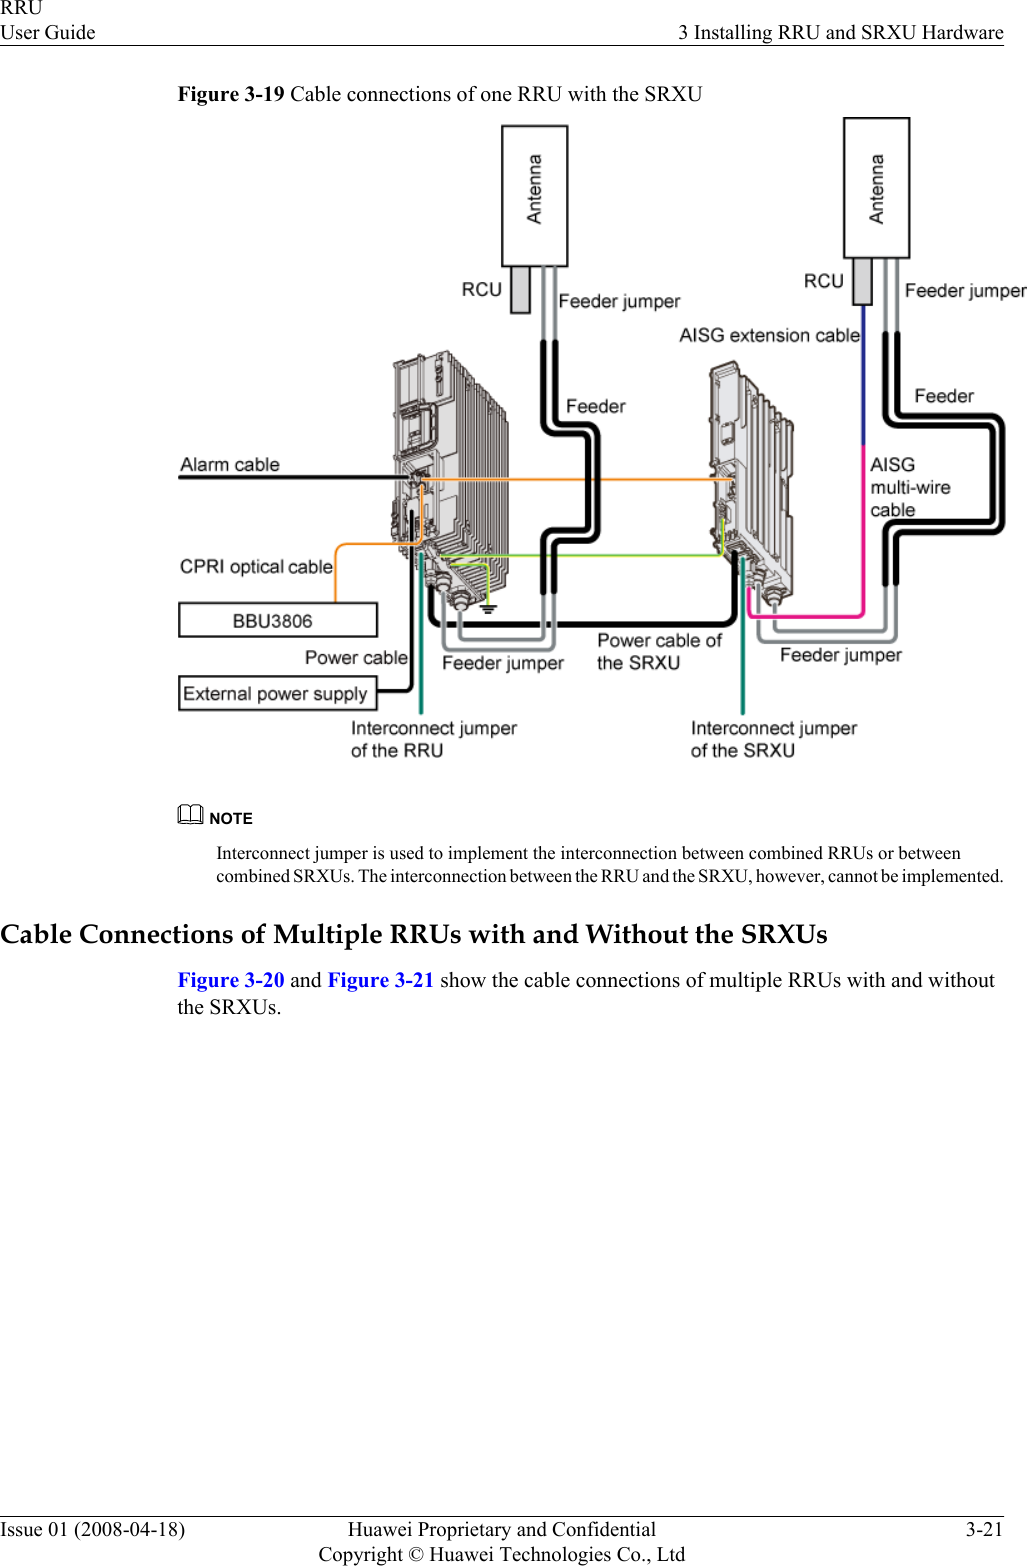 Figure 3-19 Cable connections of one RRU with the SRXUNOTEInterconnect jumper is used to implement the interconnection between combined RRUs or betweencombined SRXUs. The interconnection between the RRU and the SRXU, however, cannot be implemented.Cable Connections of Multiple RRUs with and Without the SRXUsFigure 3-20 and Figure 3-21 show the cable connections of multiple RRUs with and withoutthe SRXUs.RRUUser Guide 3 Installing RRU and SRXU HardwareIssue 01 (2008-04-18) Huawei Proprietary and ConfidentialCopyright © Huawei Technologies Co., Ltd3-21